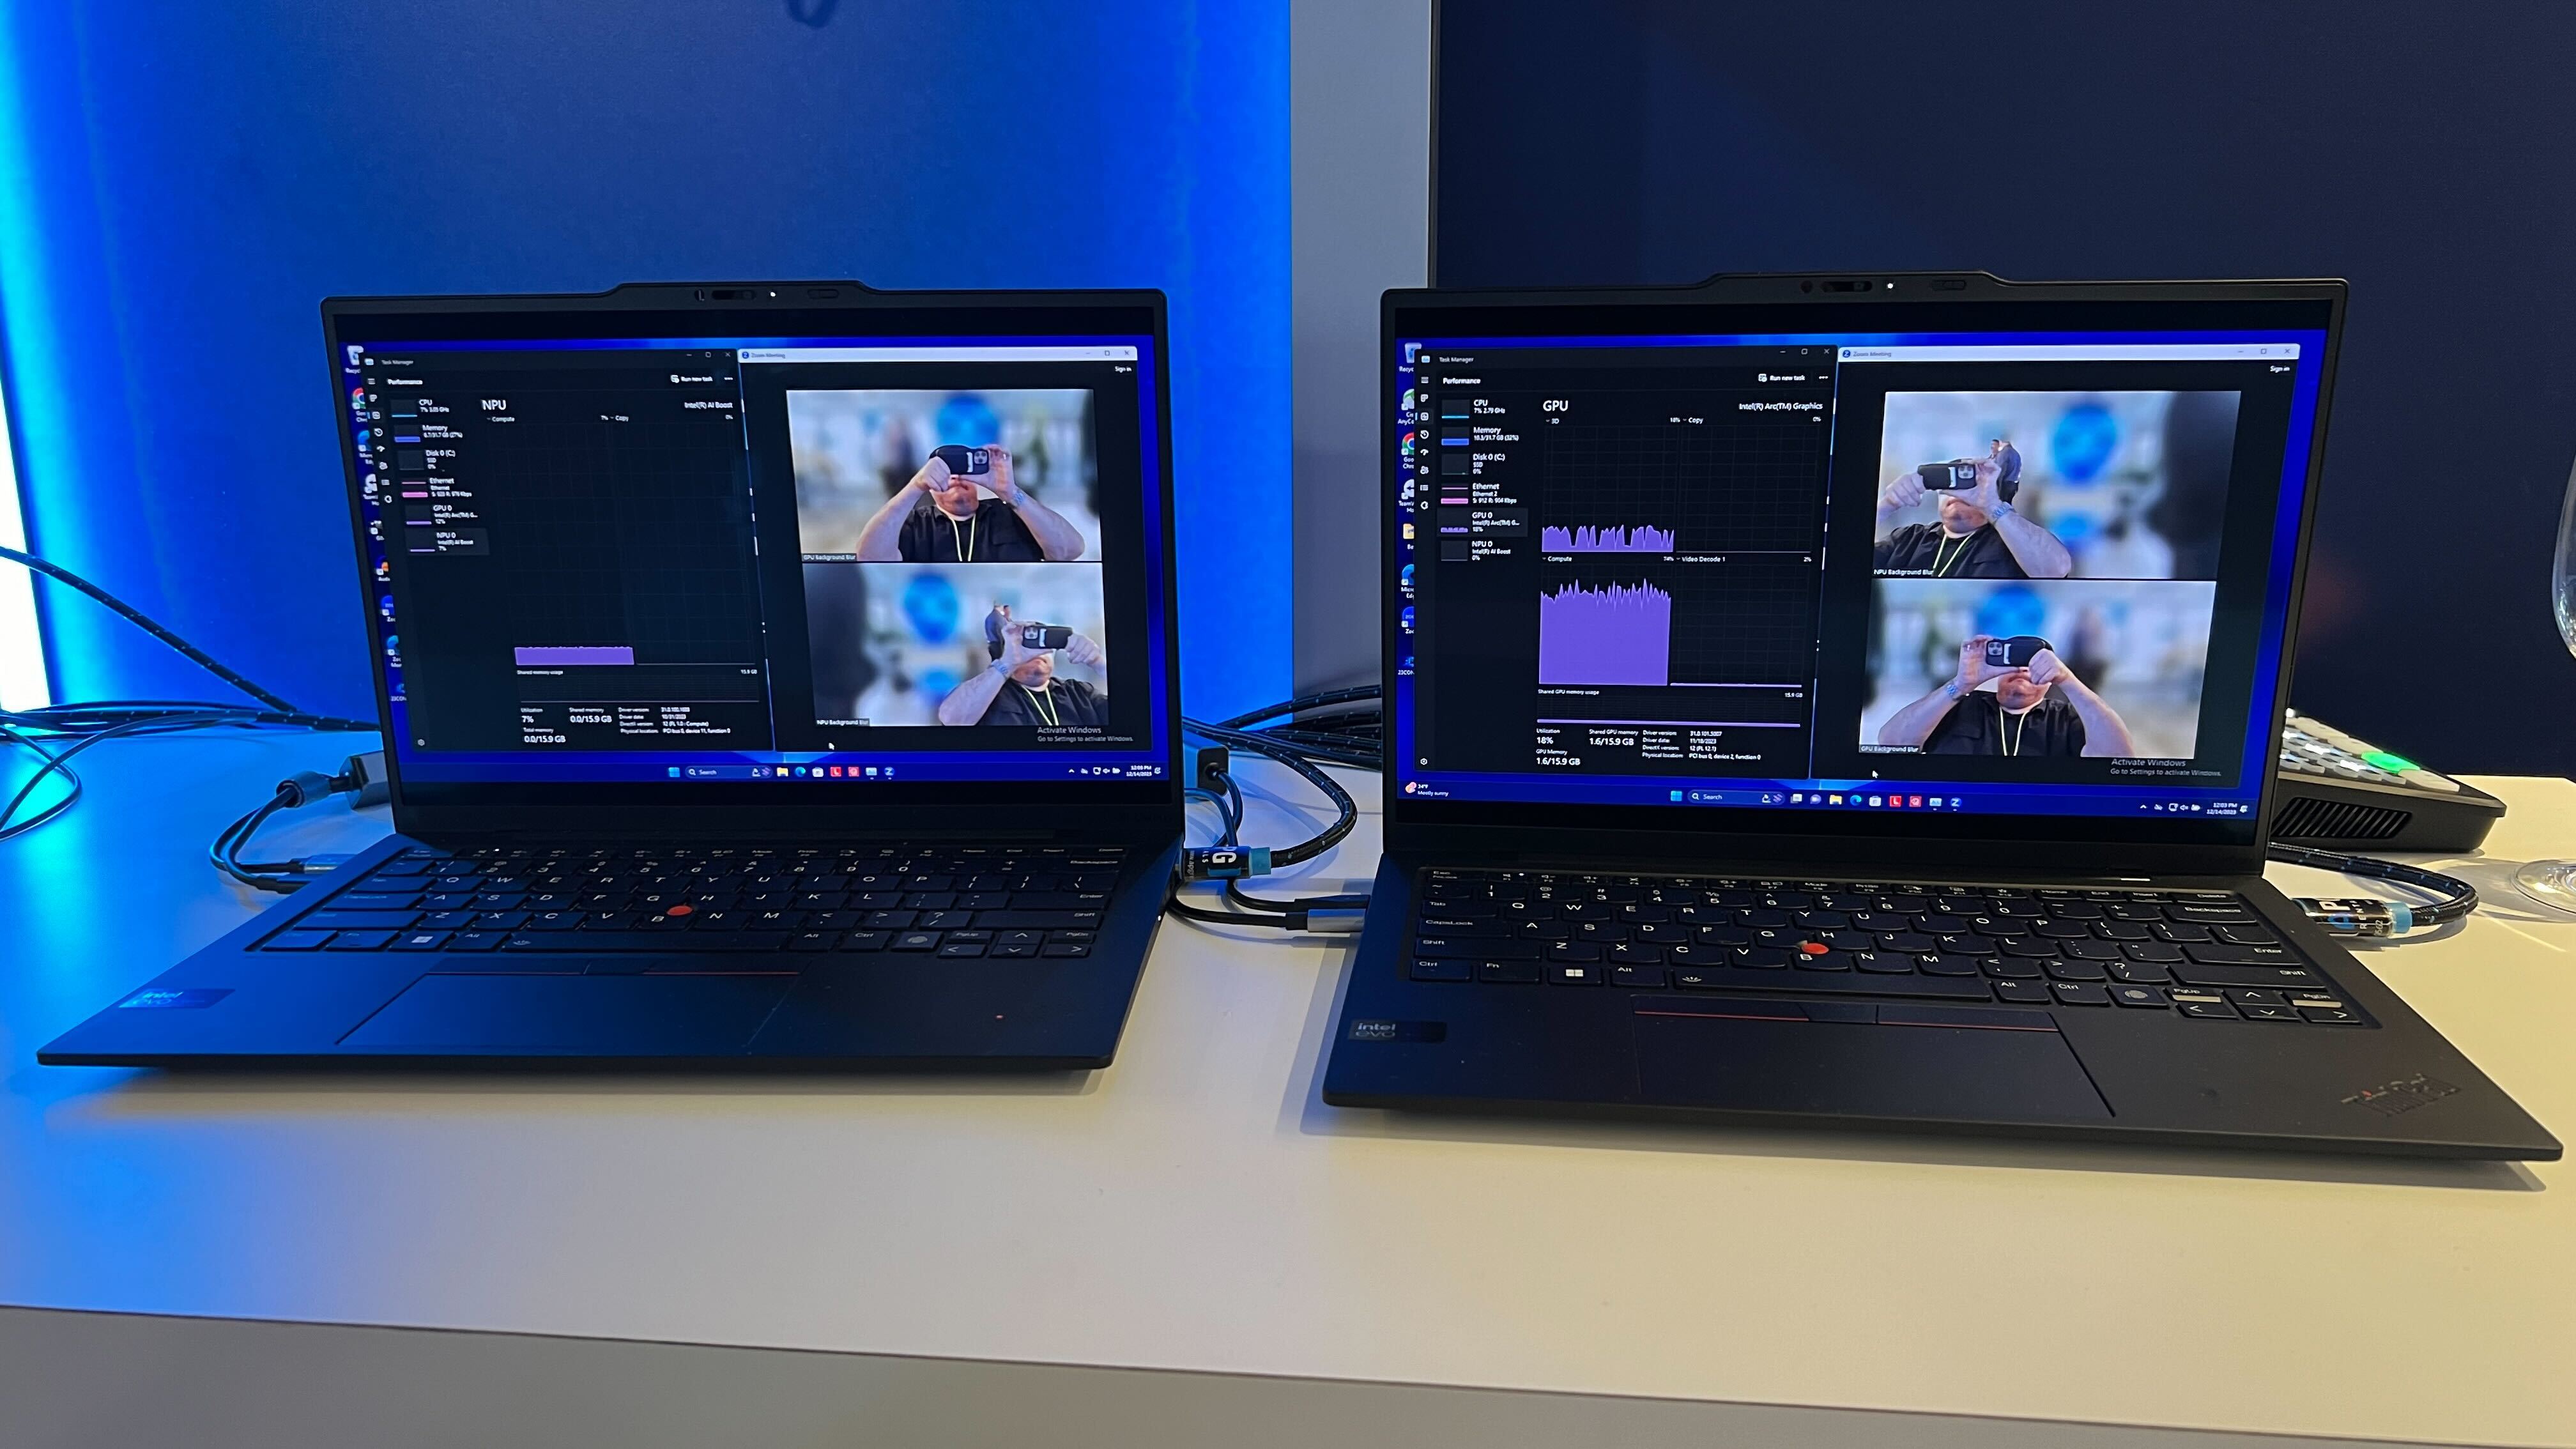 Intel Meteor Lake demos at the unveil event